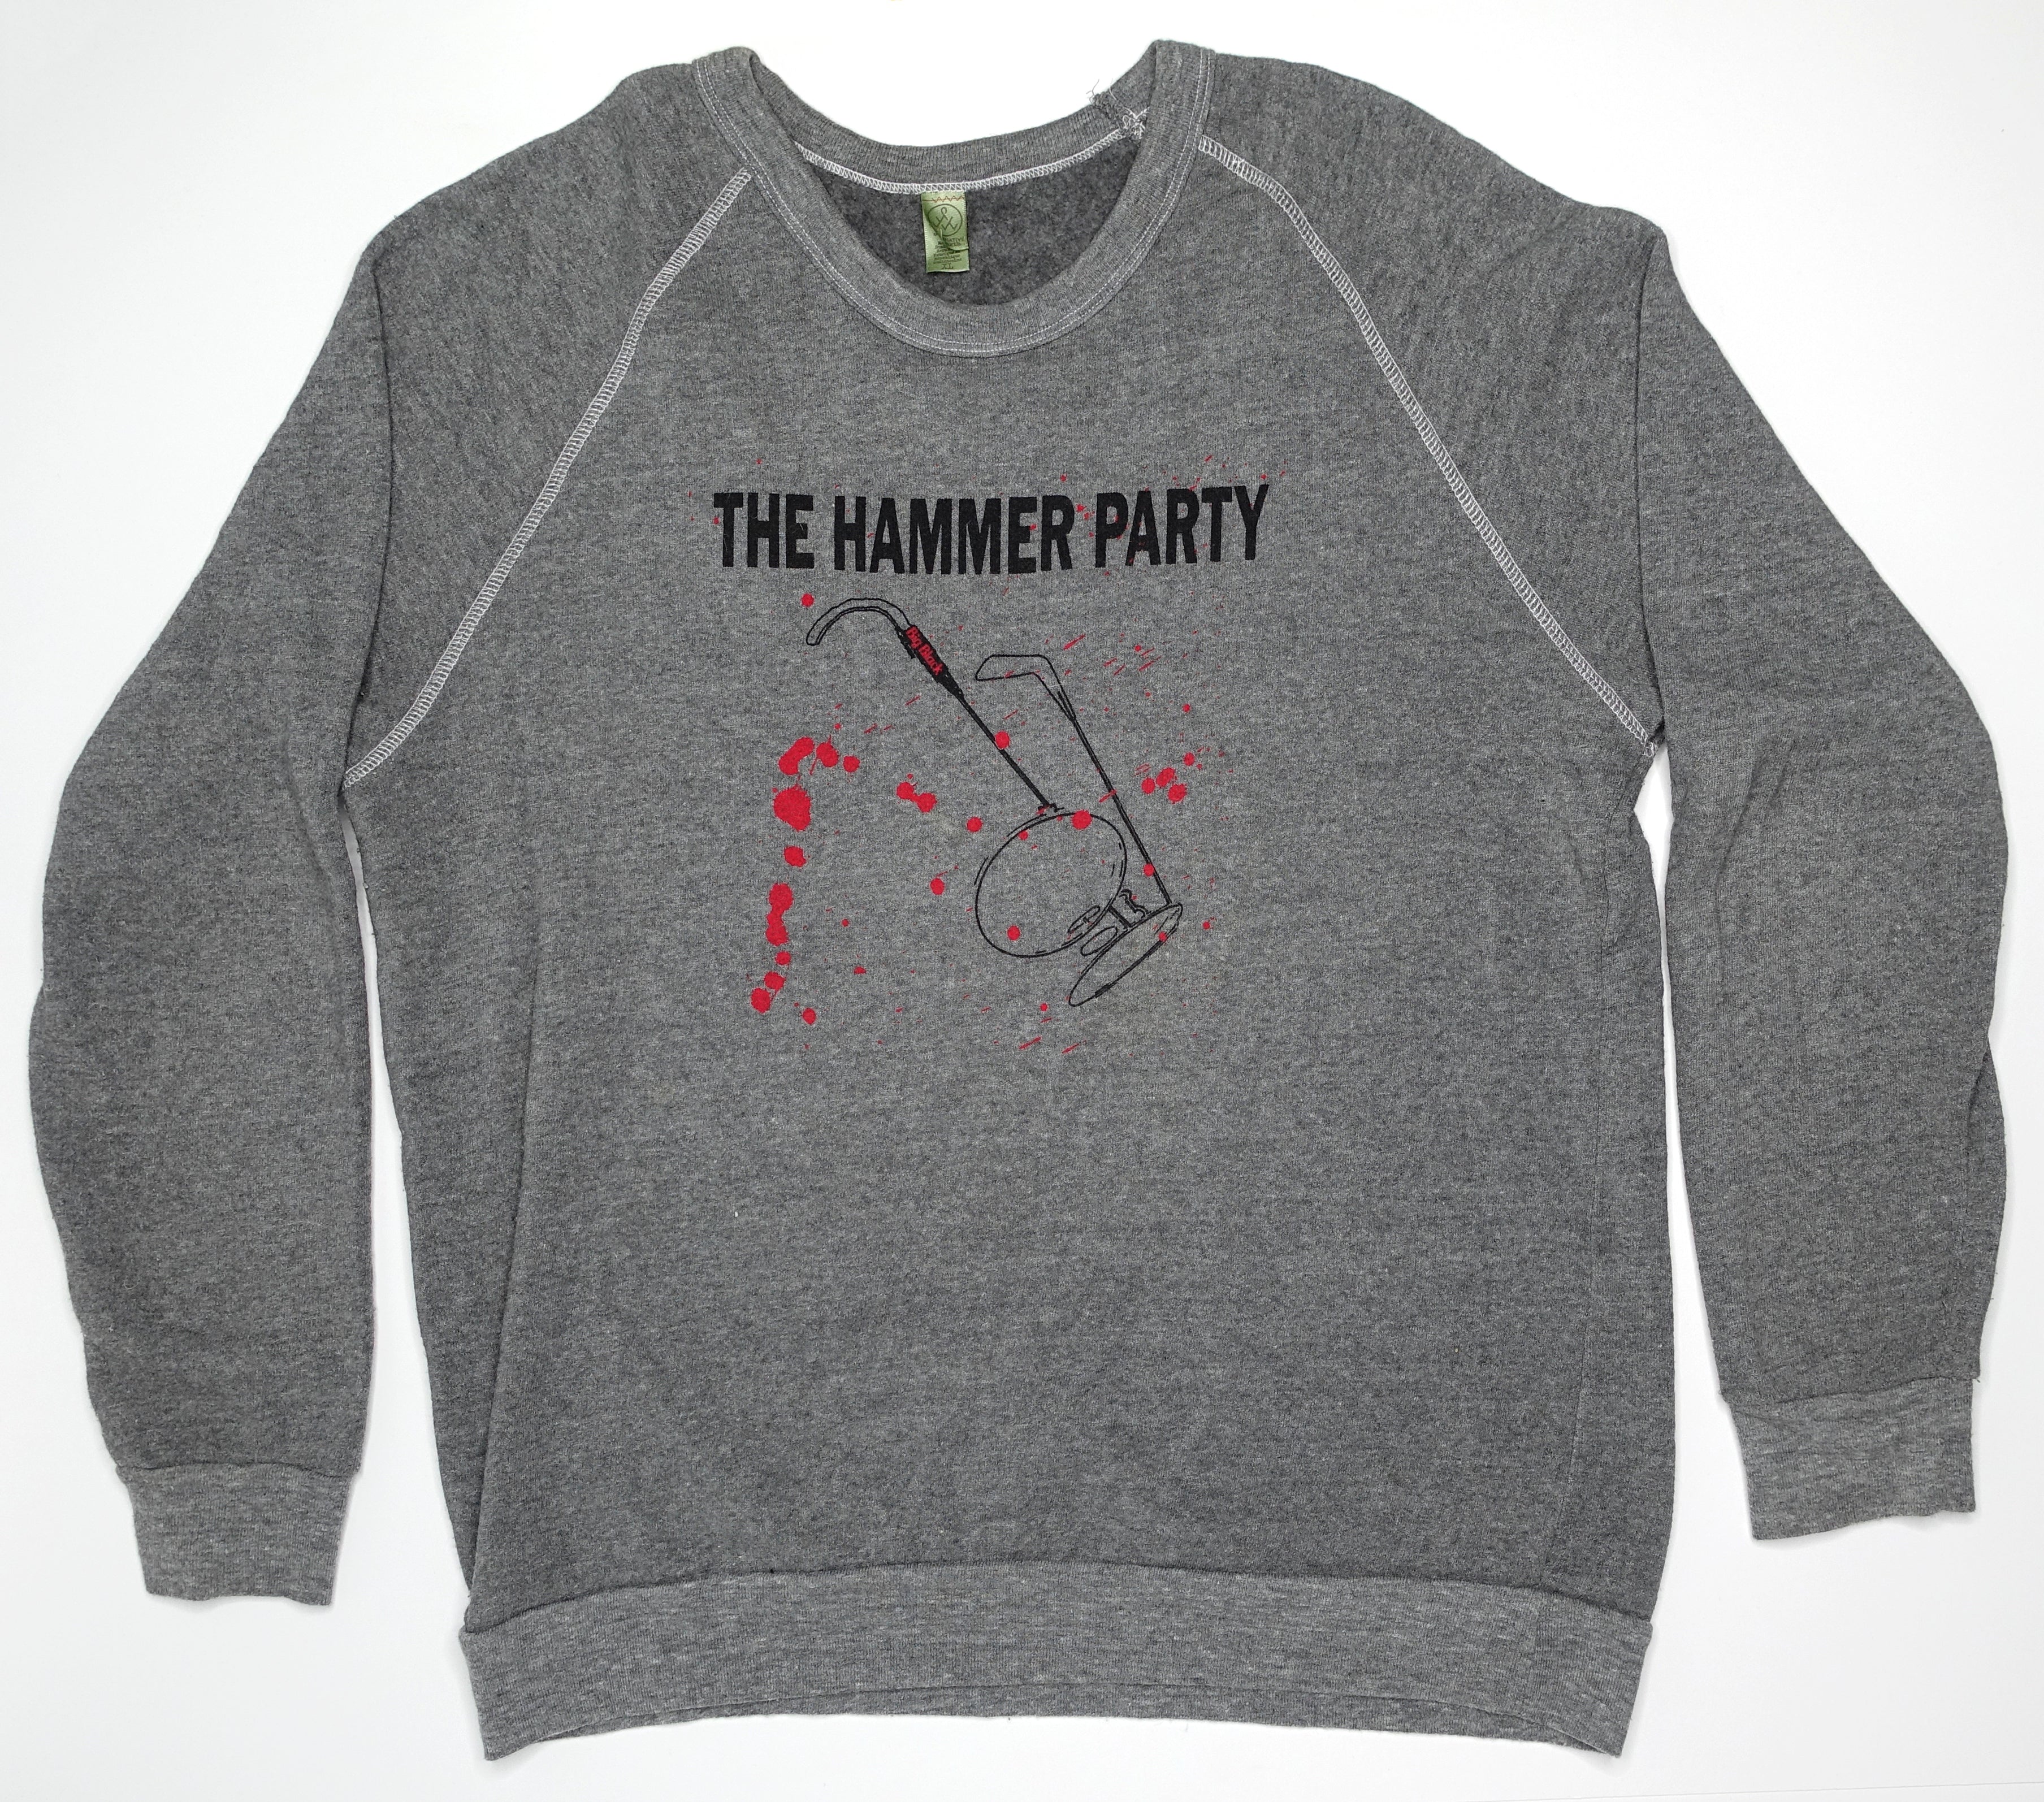 Big Black - Hammer Party (Bootleg By Me) Sweat Shirt Size XL